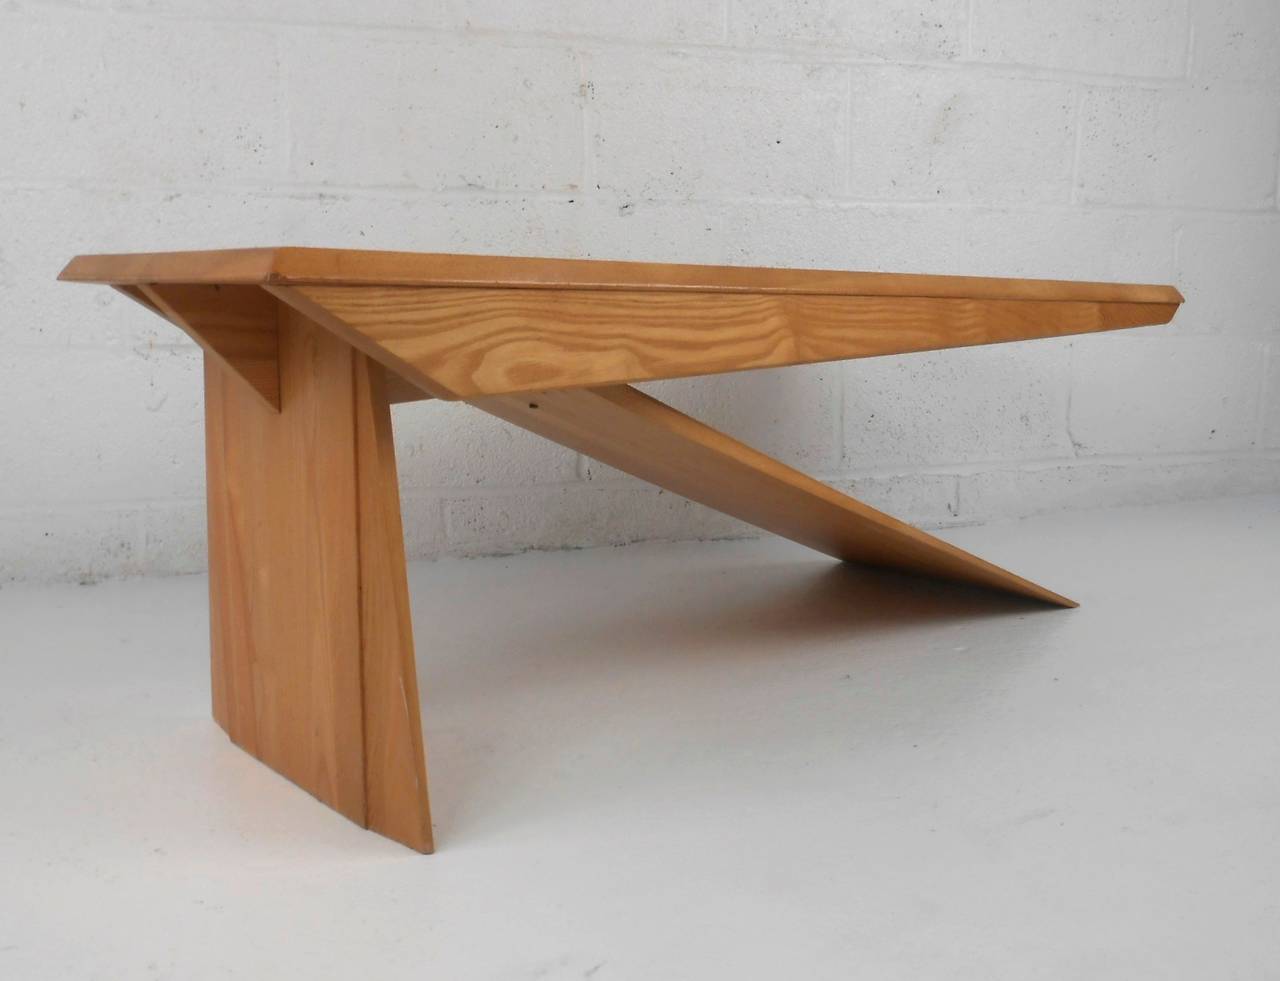 Unique Mid Century Modern Style Cantilever Studio Coffee Table At 1stdibs